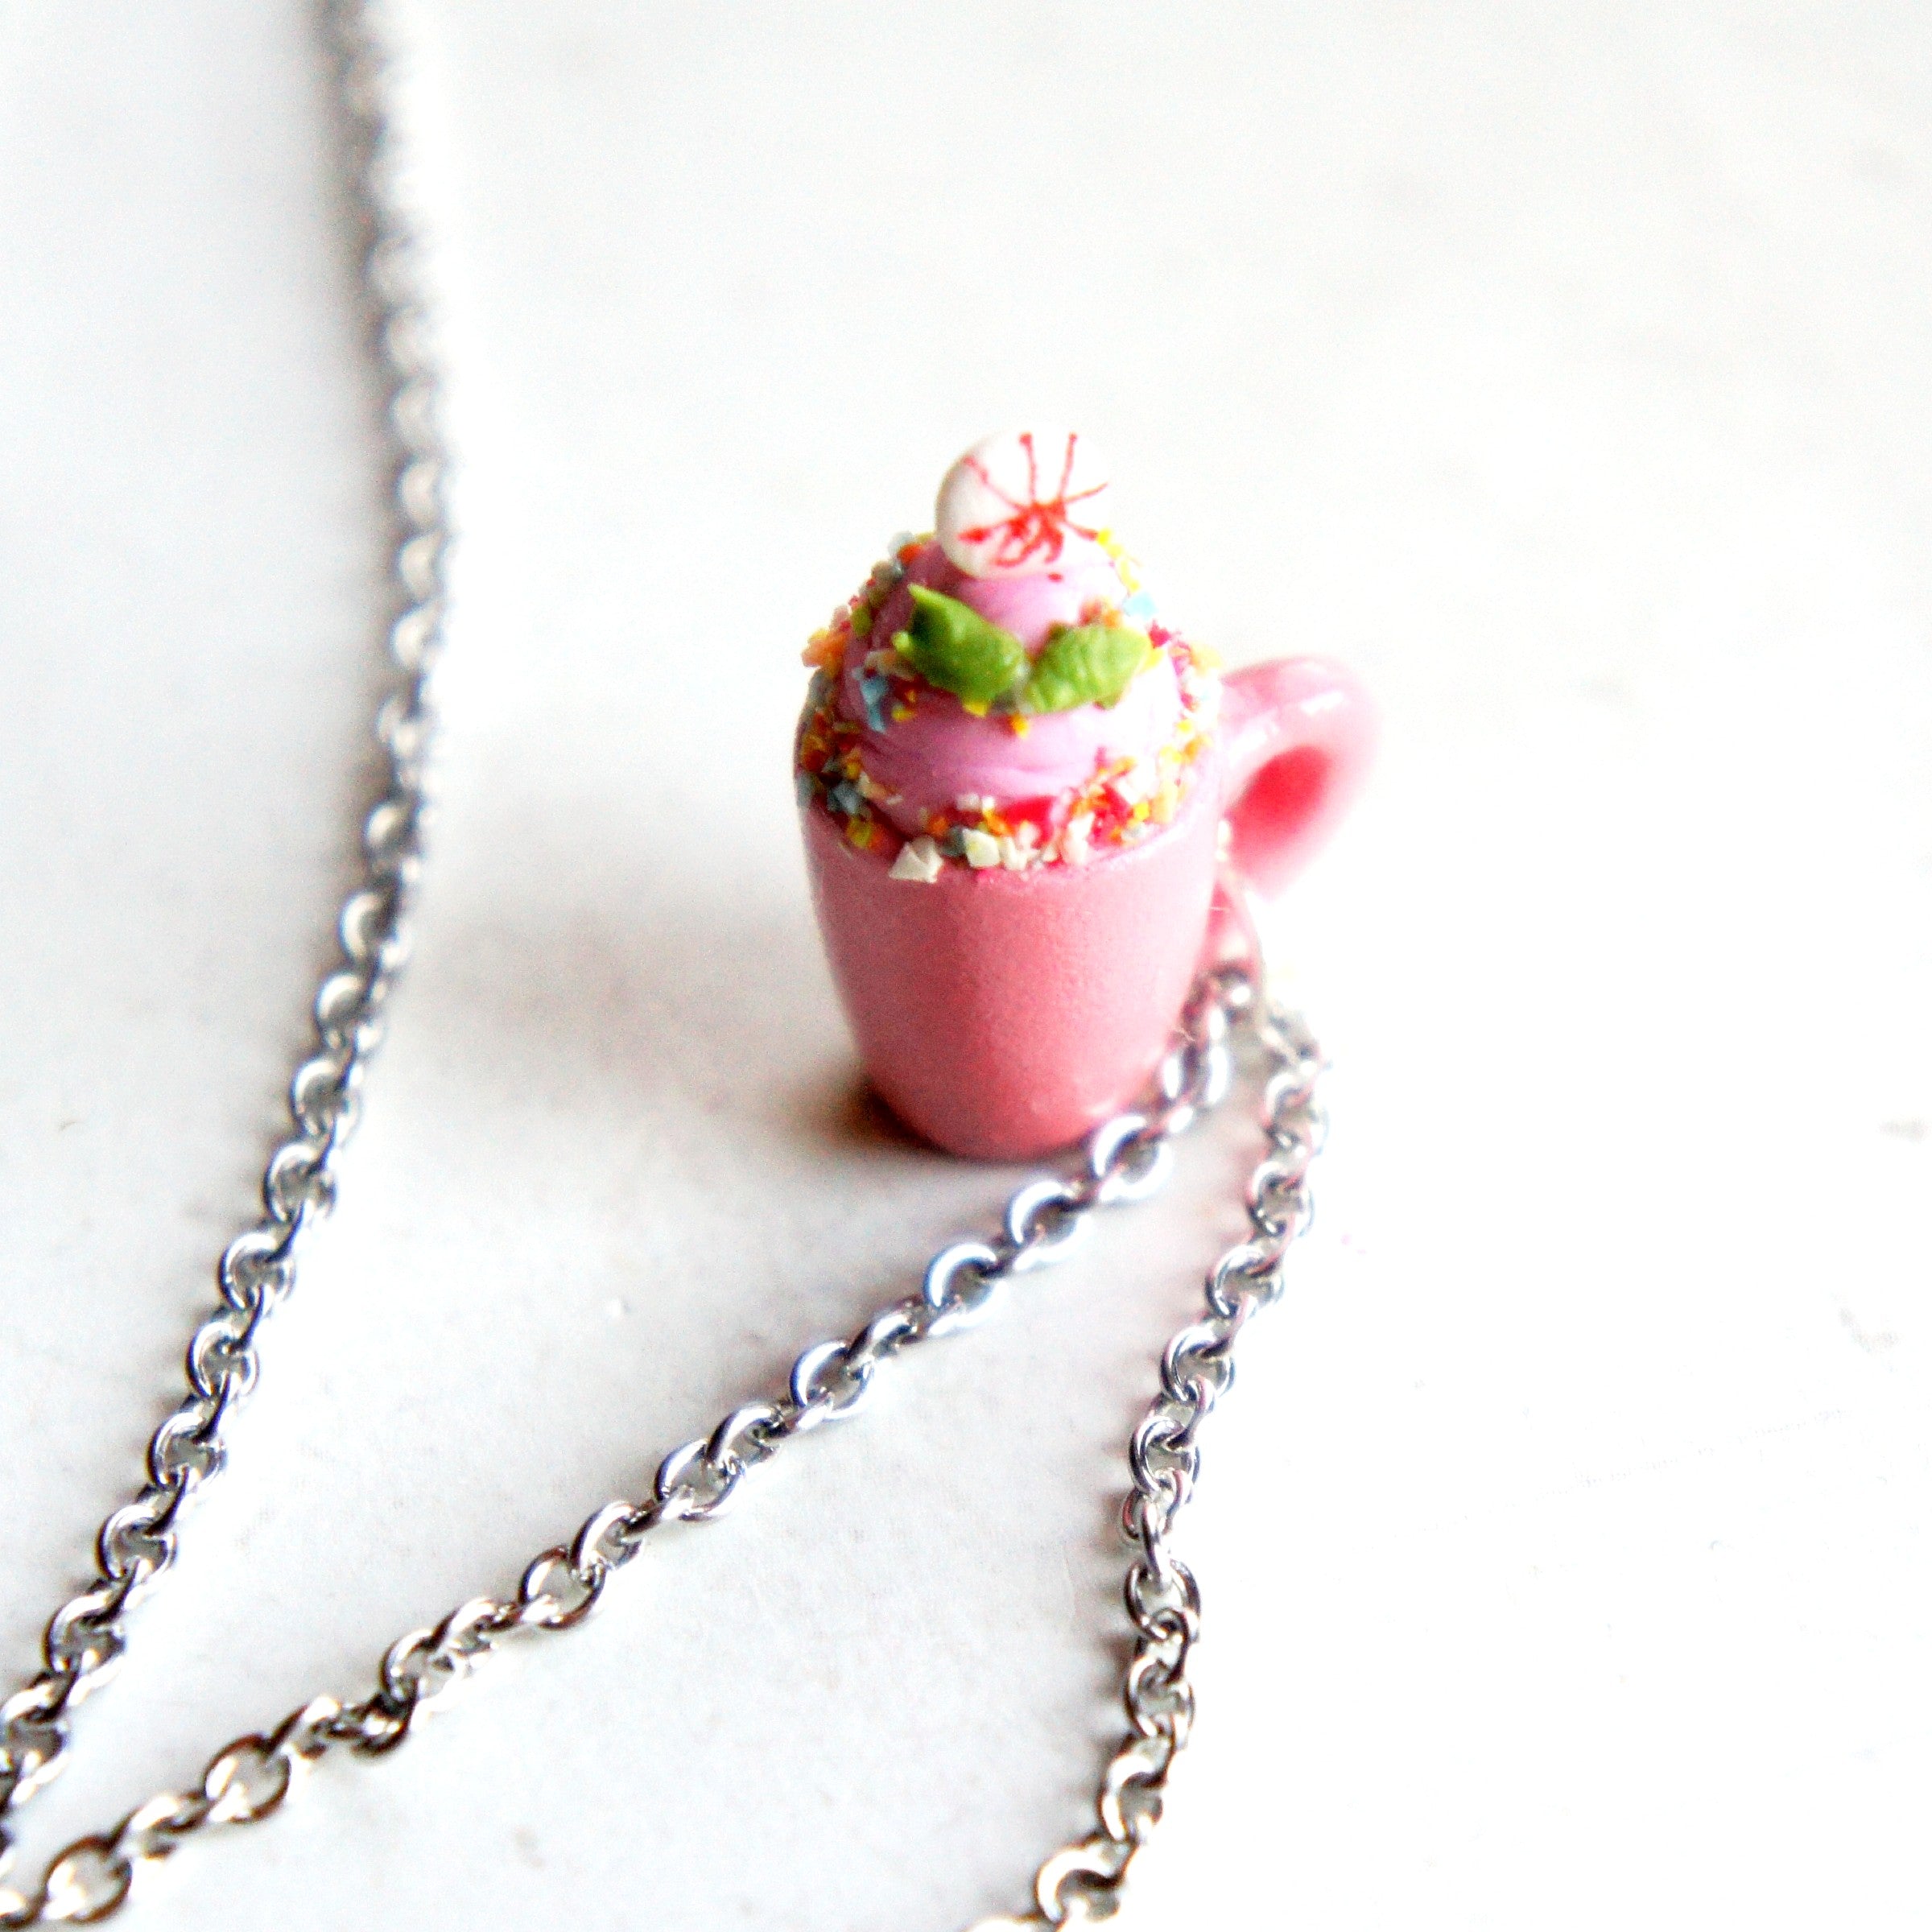 Unicorn Hot Chocolate Necklace - Jillicious charms and accessories